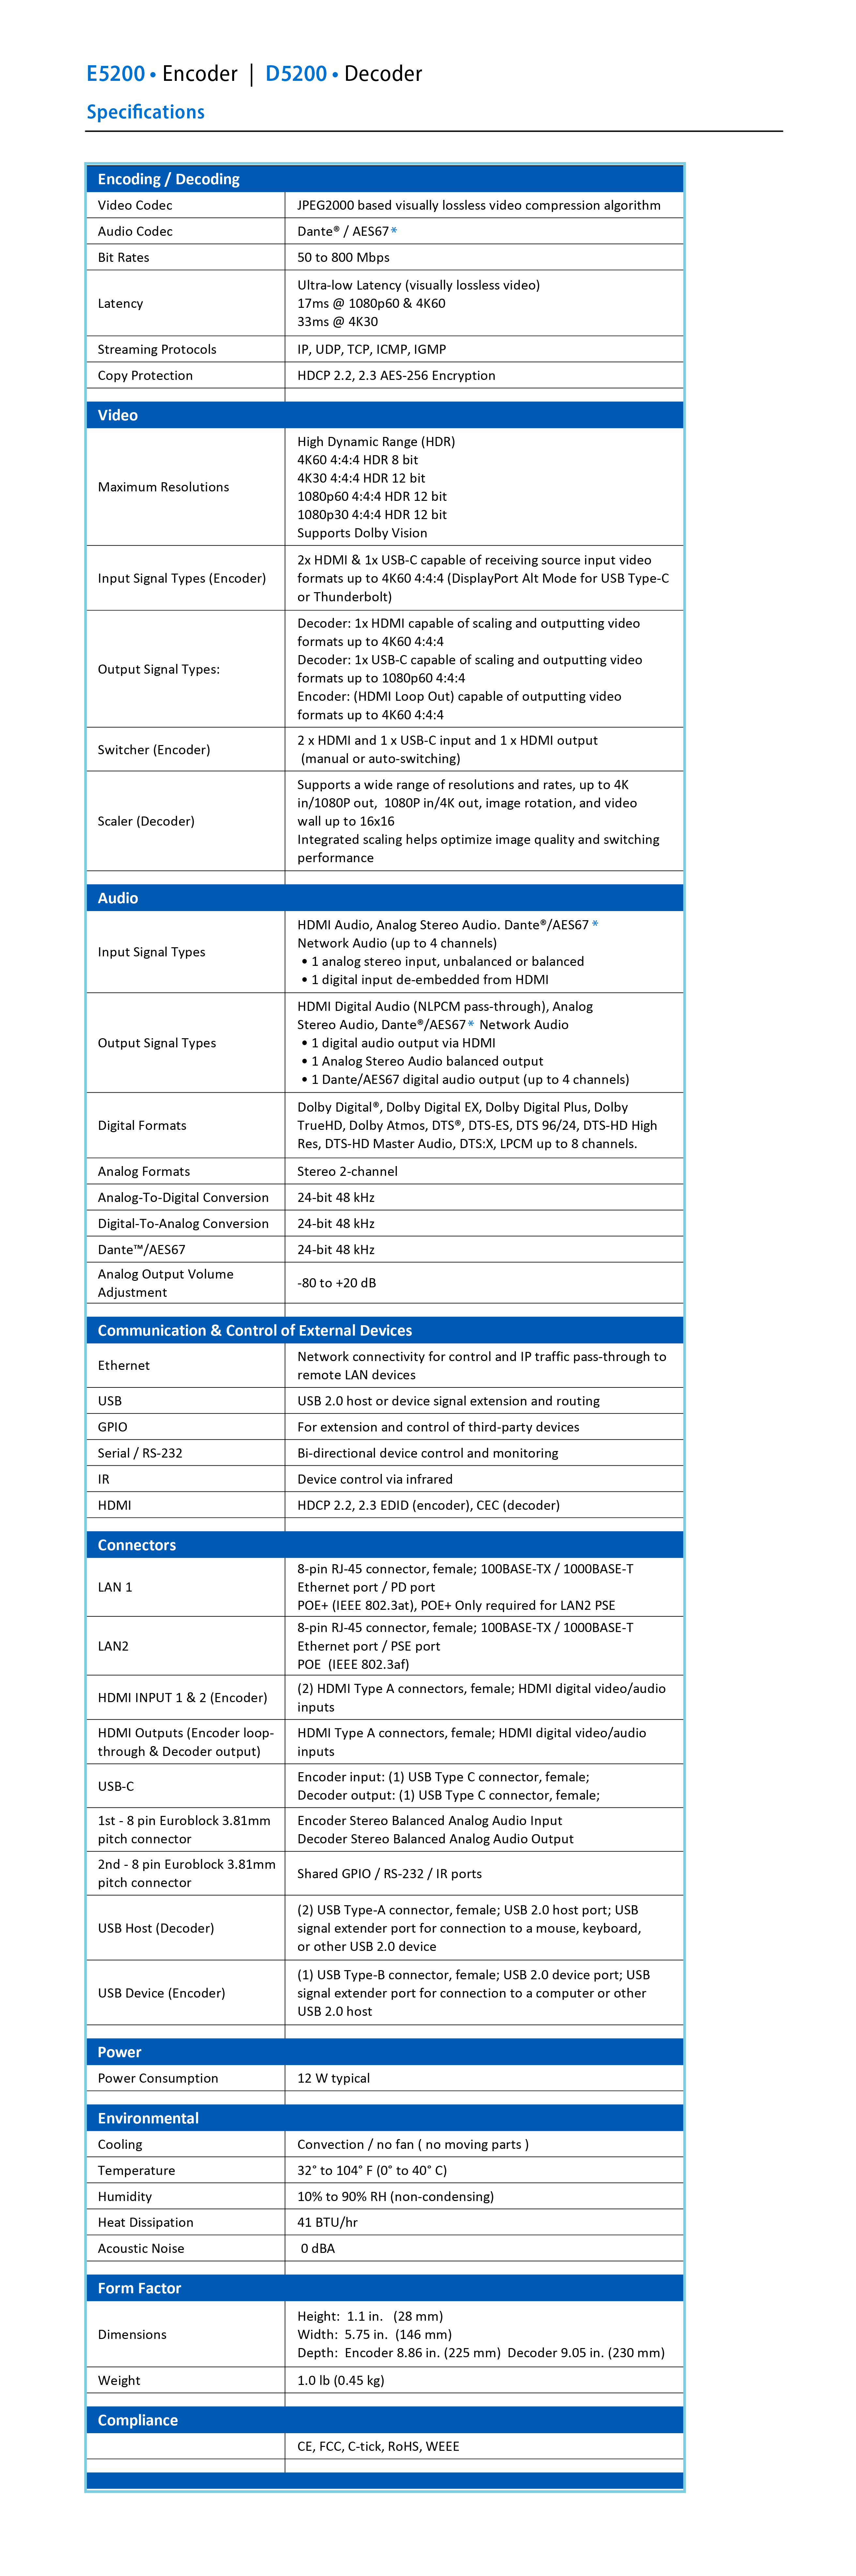 ED5200 Specifications